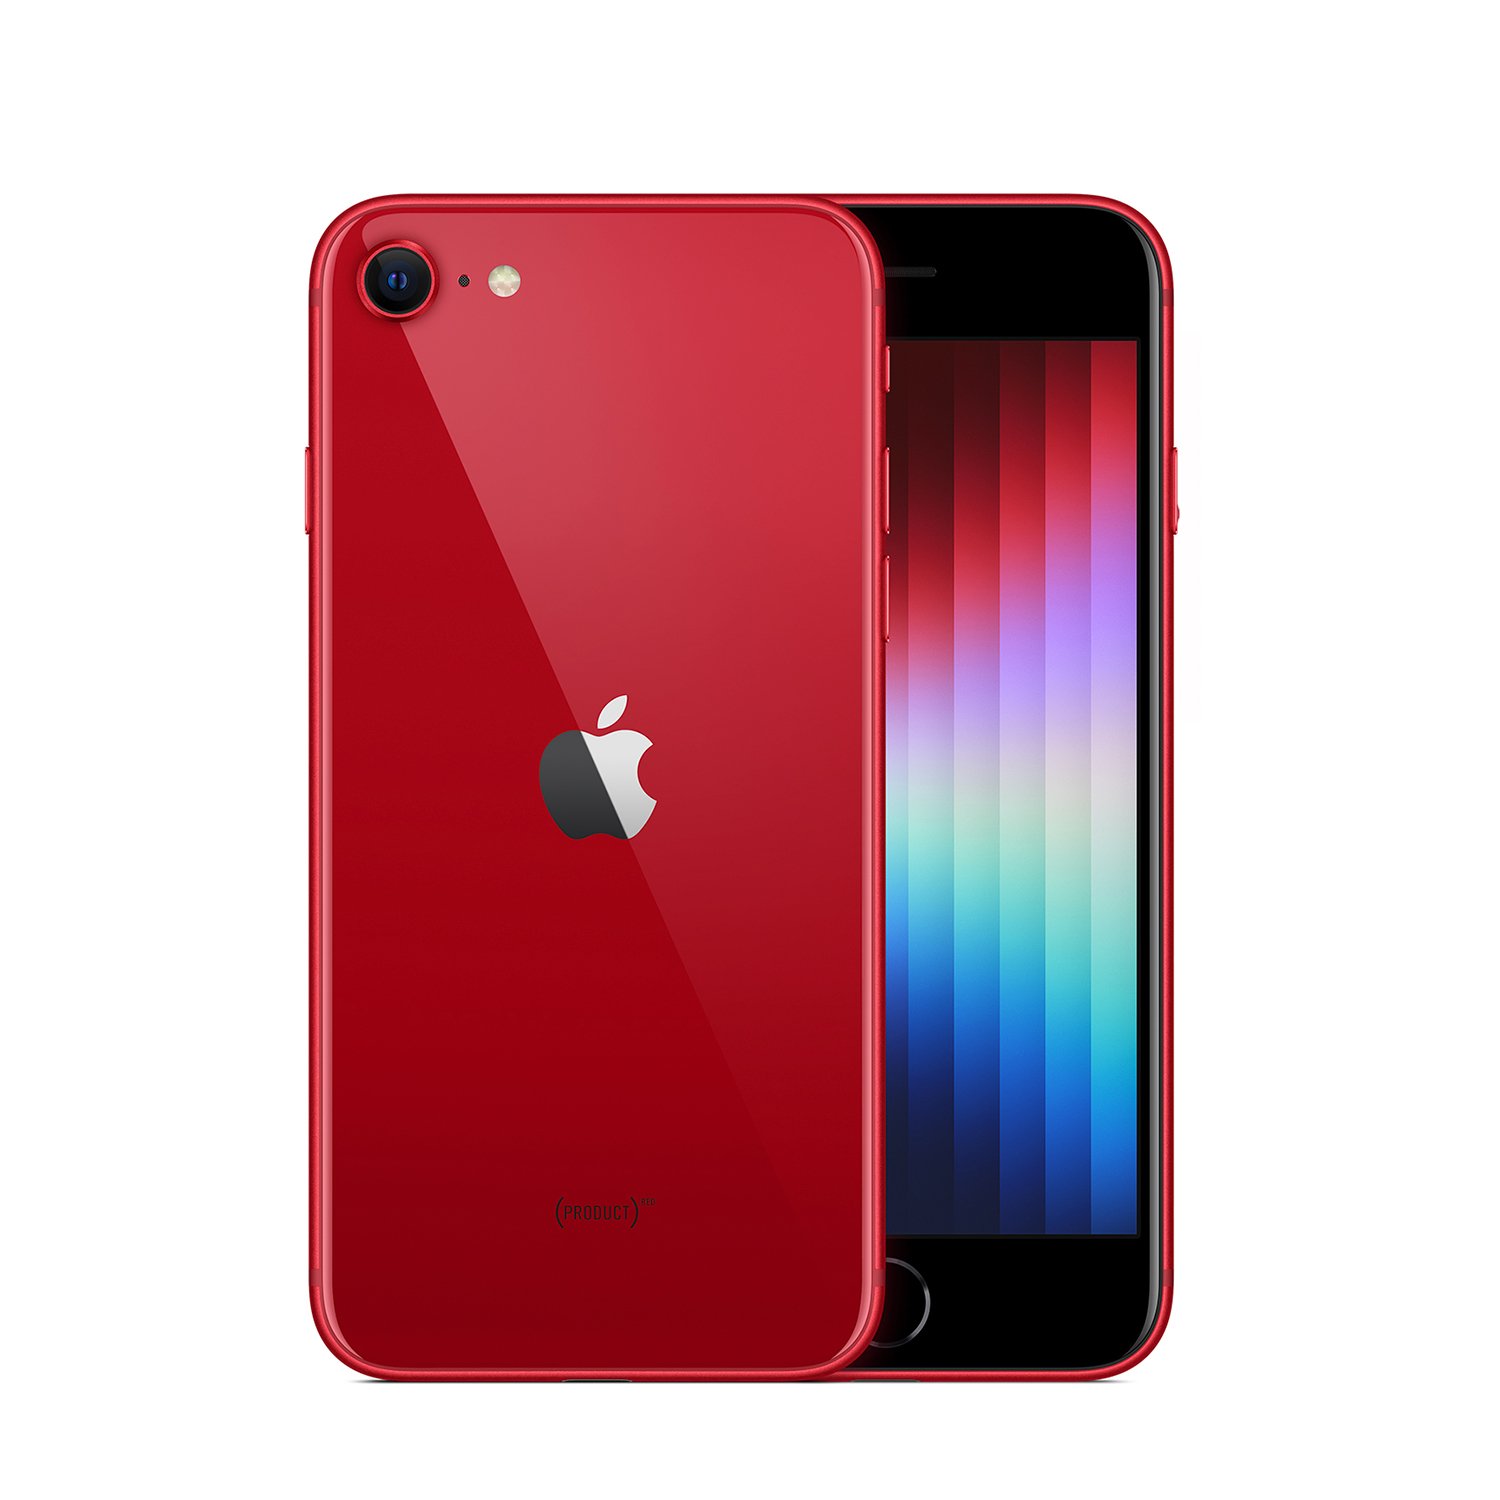 Apple iPhone SE (PRODUCT)RED — (RED)